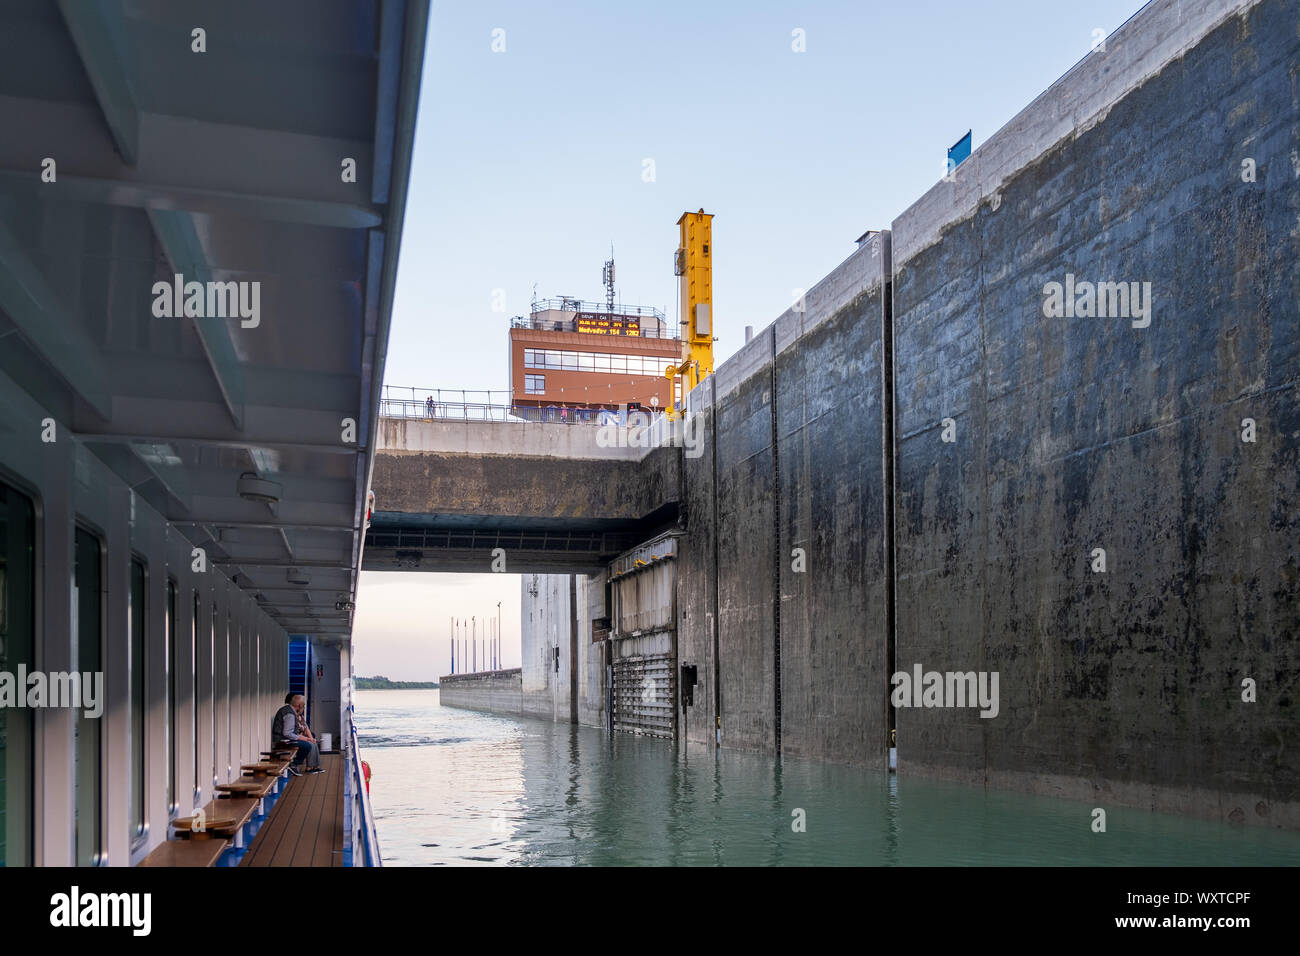 GABCIKOVO–NAGYMAROS DAM, DANUBE RIVER - AUGUST 20, 2019: Dams is a large barrage project. The project aimed at preventing catastrophic floods, improvi Stock Photo